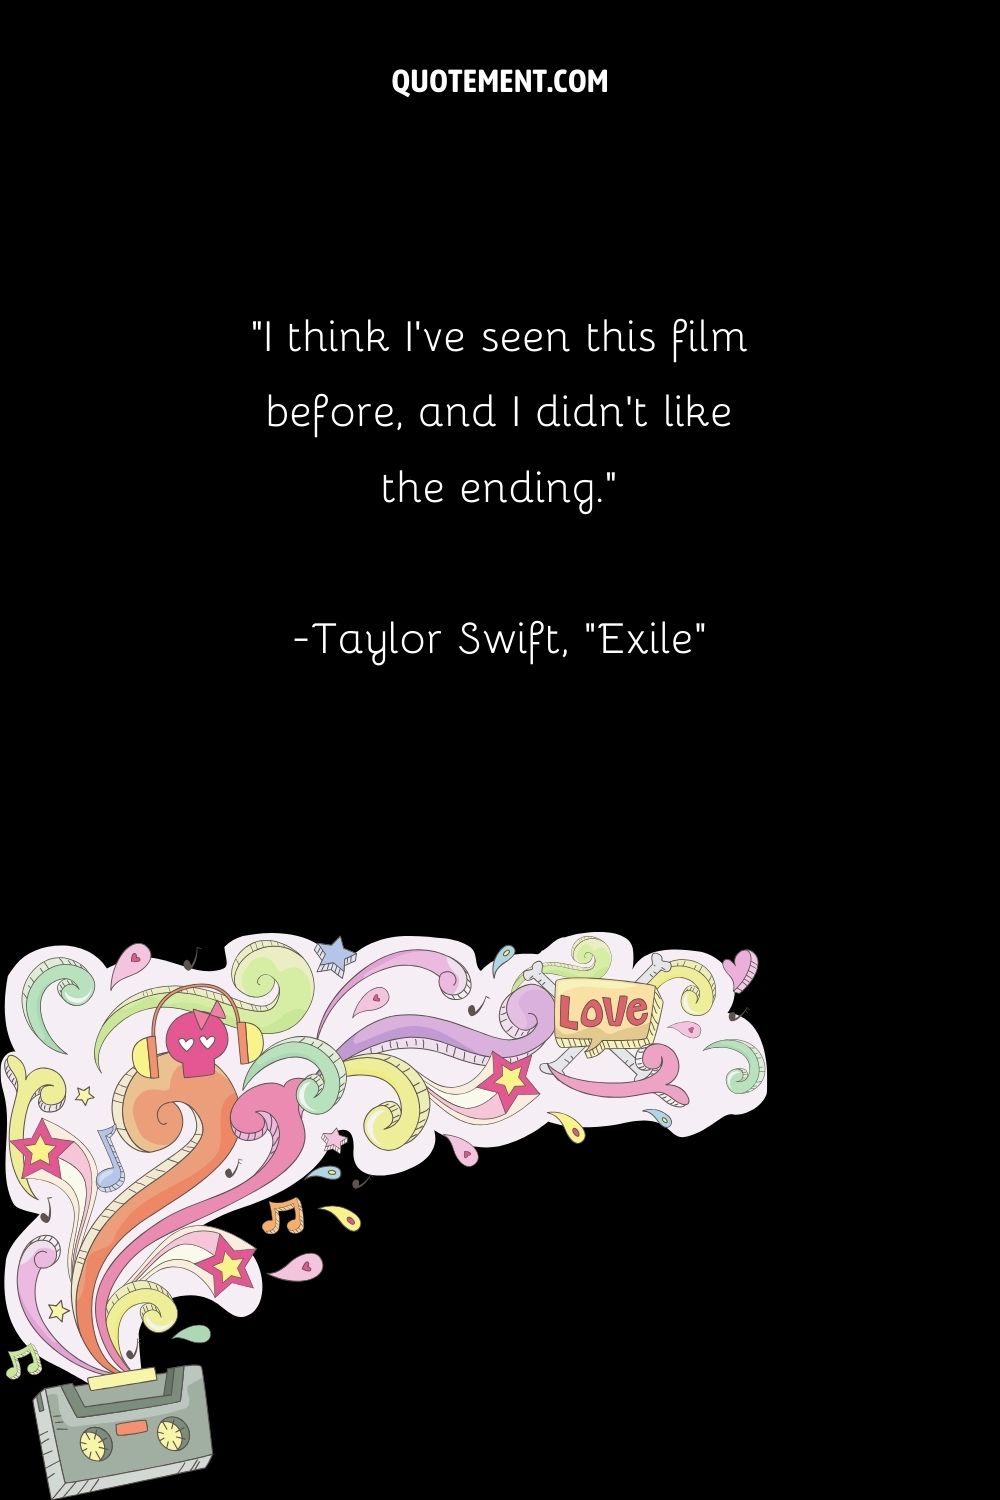 I think I've seen this film before, and I didn't like the ending. — Taylor Swift, Exile